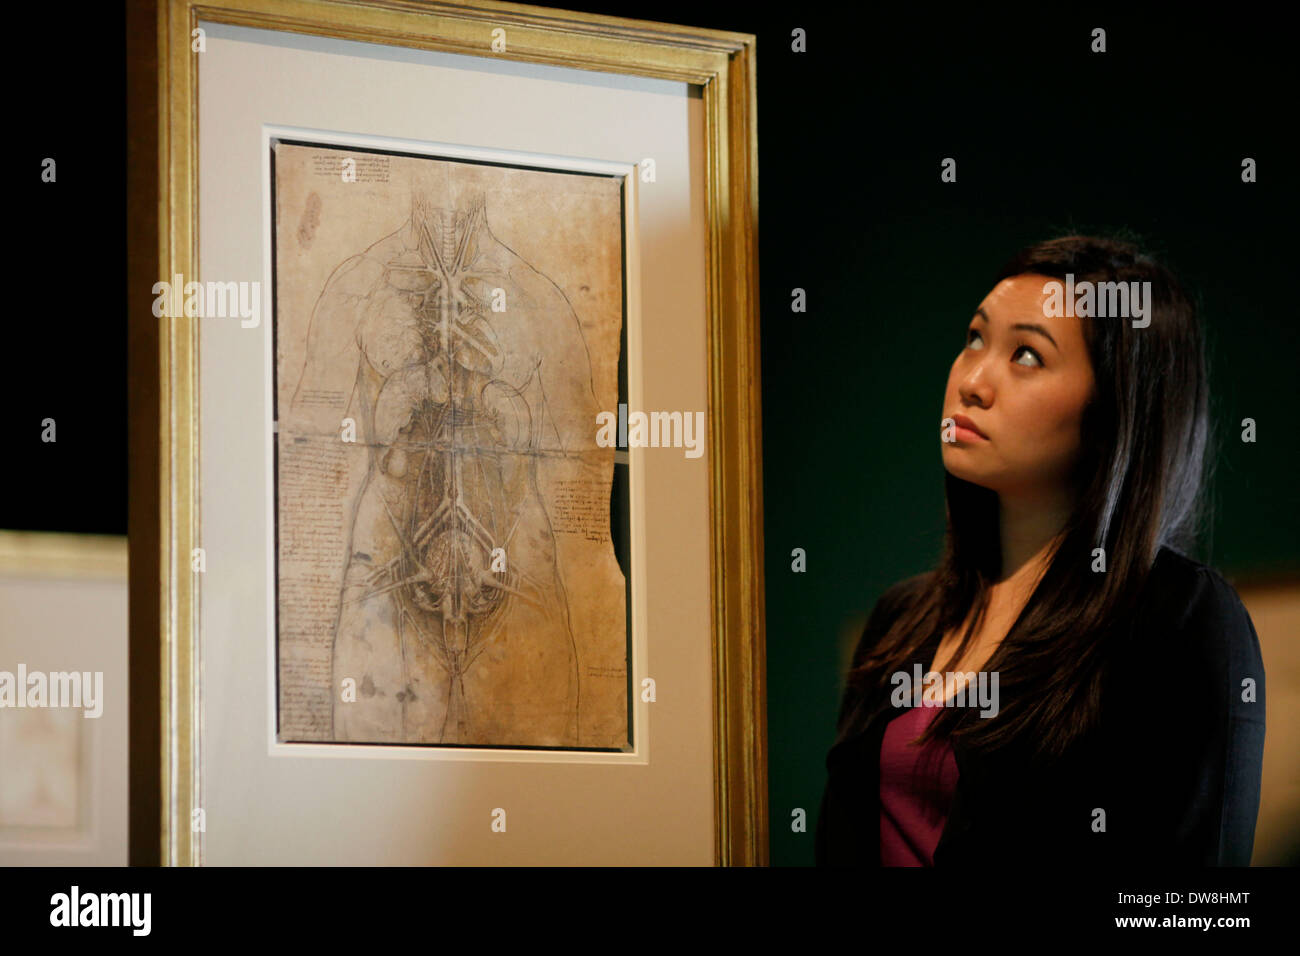 Employee Hanae Tsuji poses with artist Leonardo da Vinci's drawing 'The cardiovascular system and principal organs of a woman, c.1509-10' at the Queen's Gallery at Buckingham Palace in London April 30, 2012. The exhibition 'Leonardo da Vinci : Anatomist' opens Friday and runs to October 7, 2012. Stock Photo